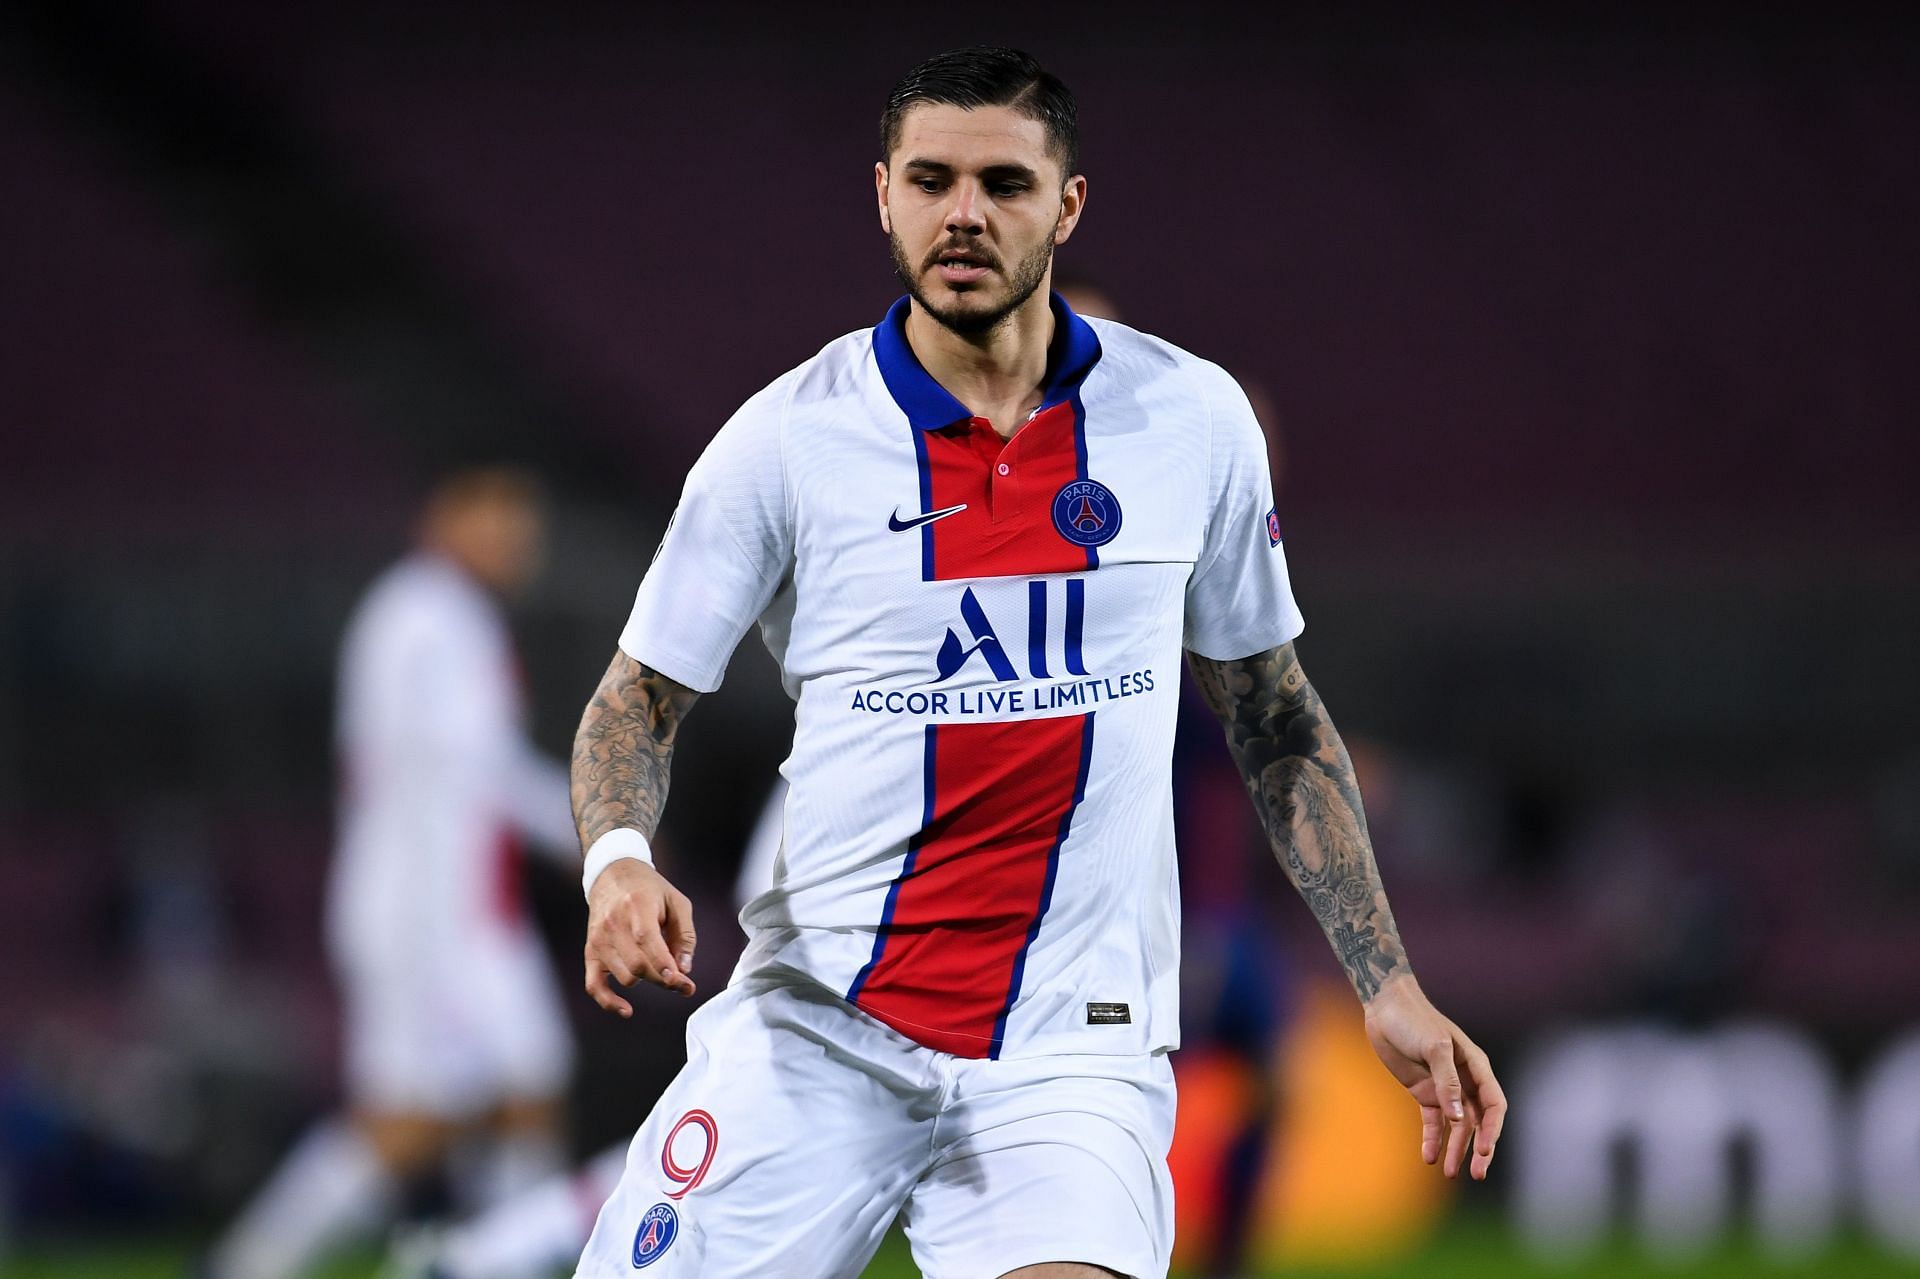 Icardi looks set to end his Ligue 1 spell next year